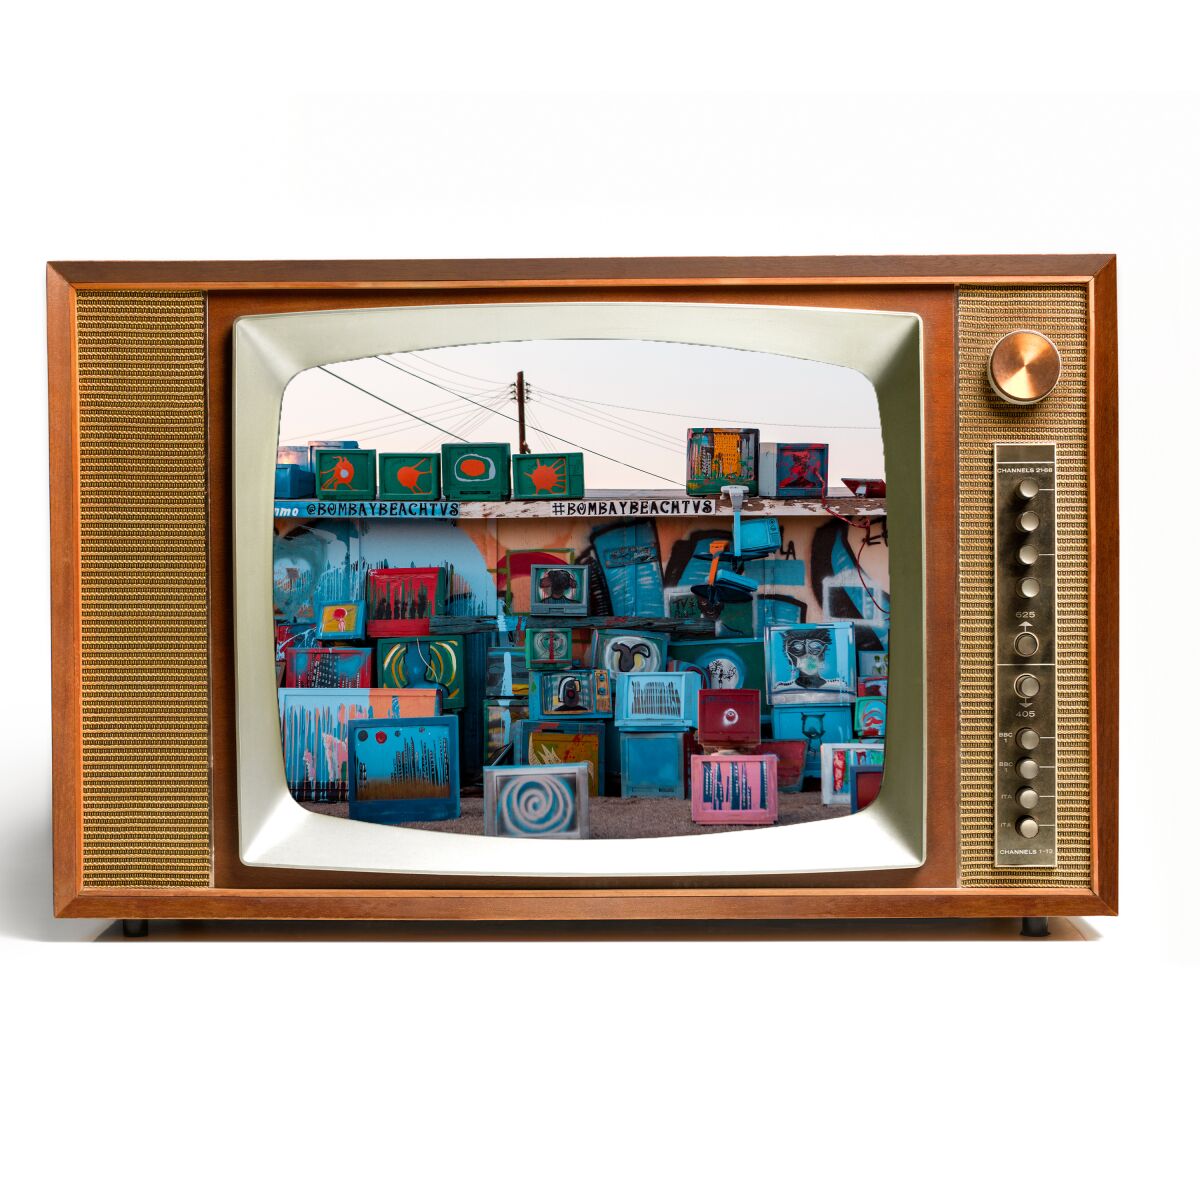 Picture of TV sets painted with scenes and stacked like an art project